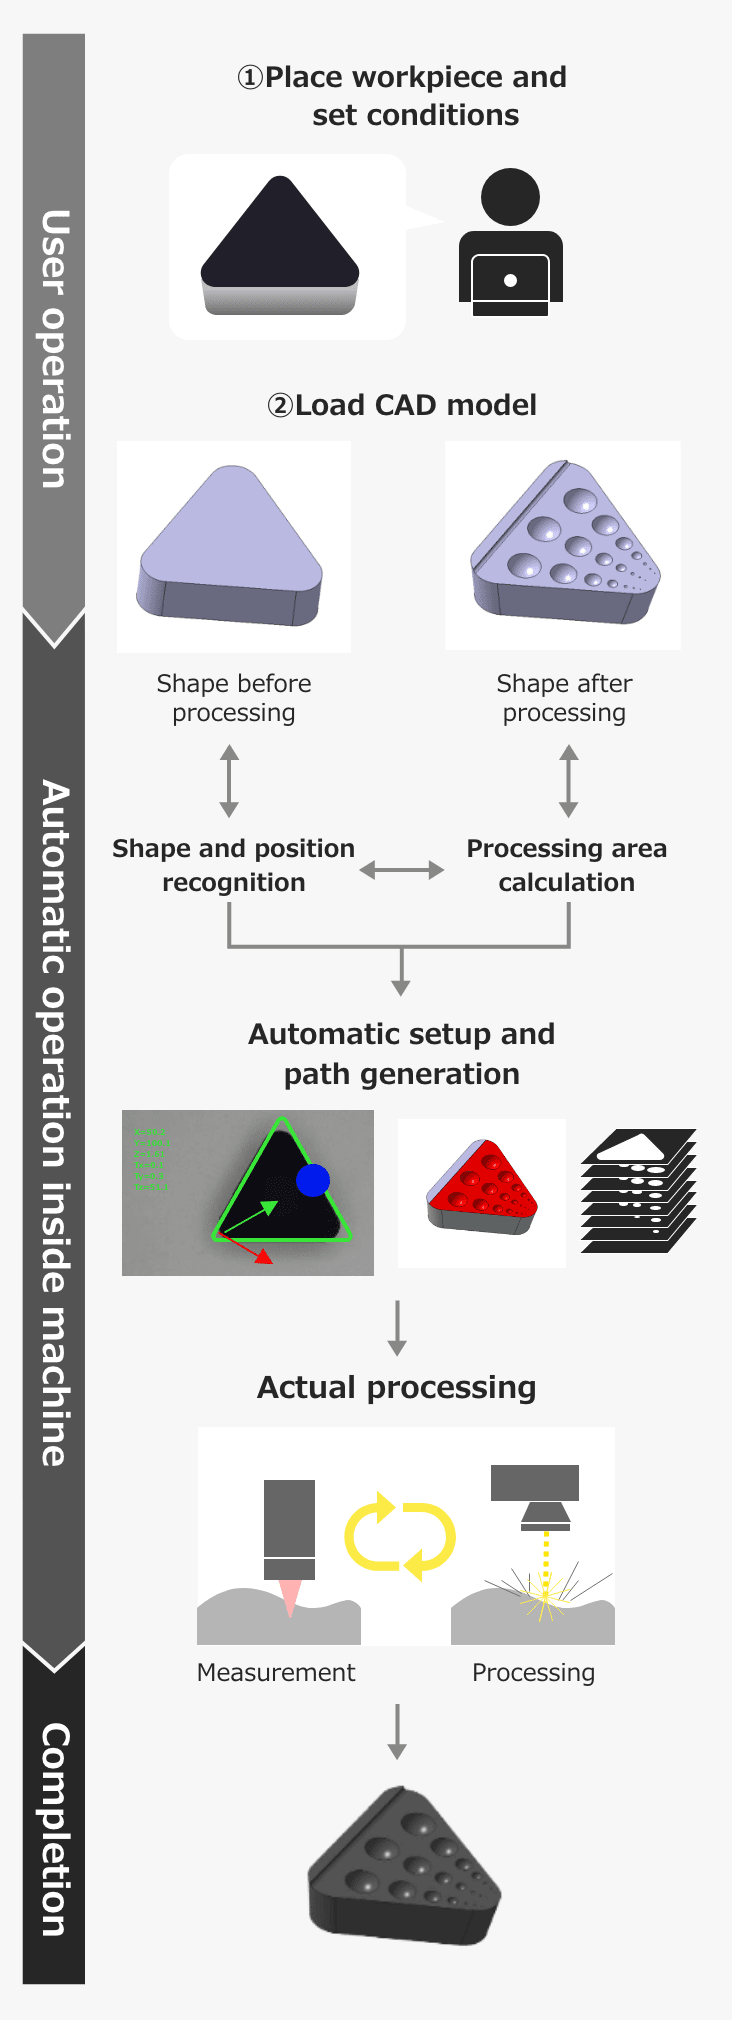 Processes performed when using the optical subtractive processing machine